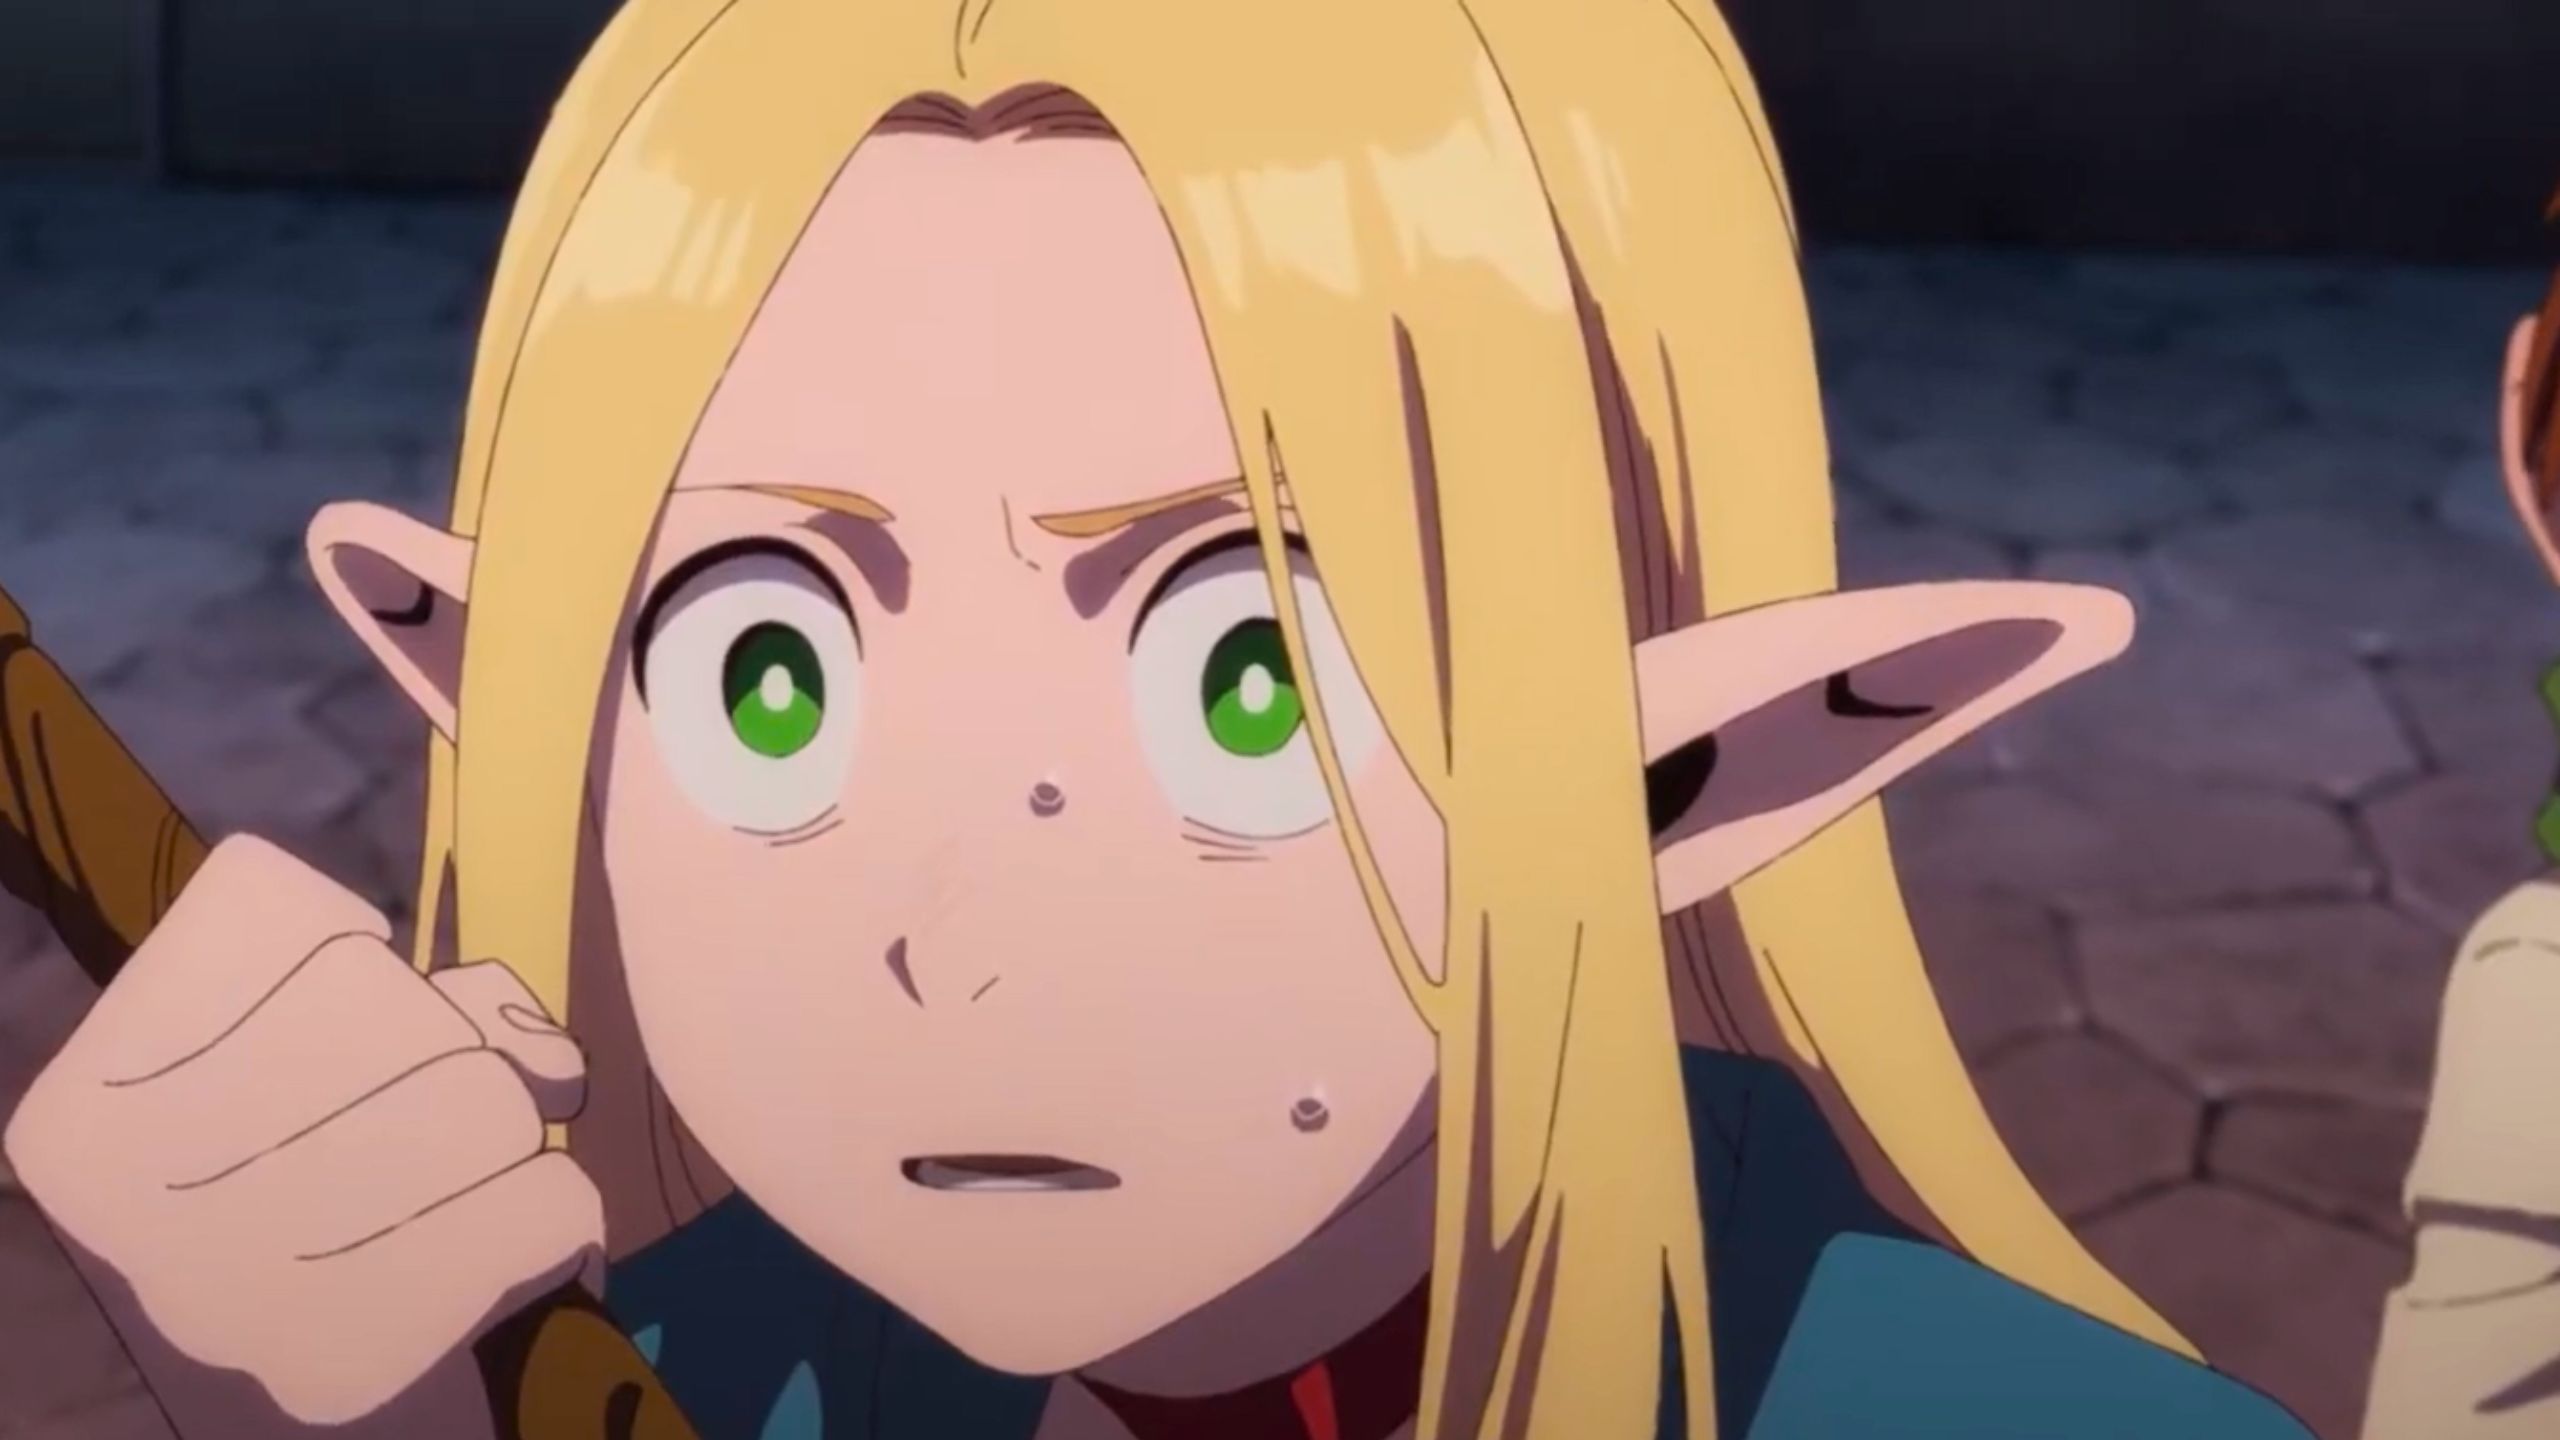 Delicious In Dungeon Episode 14 Release Date